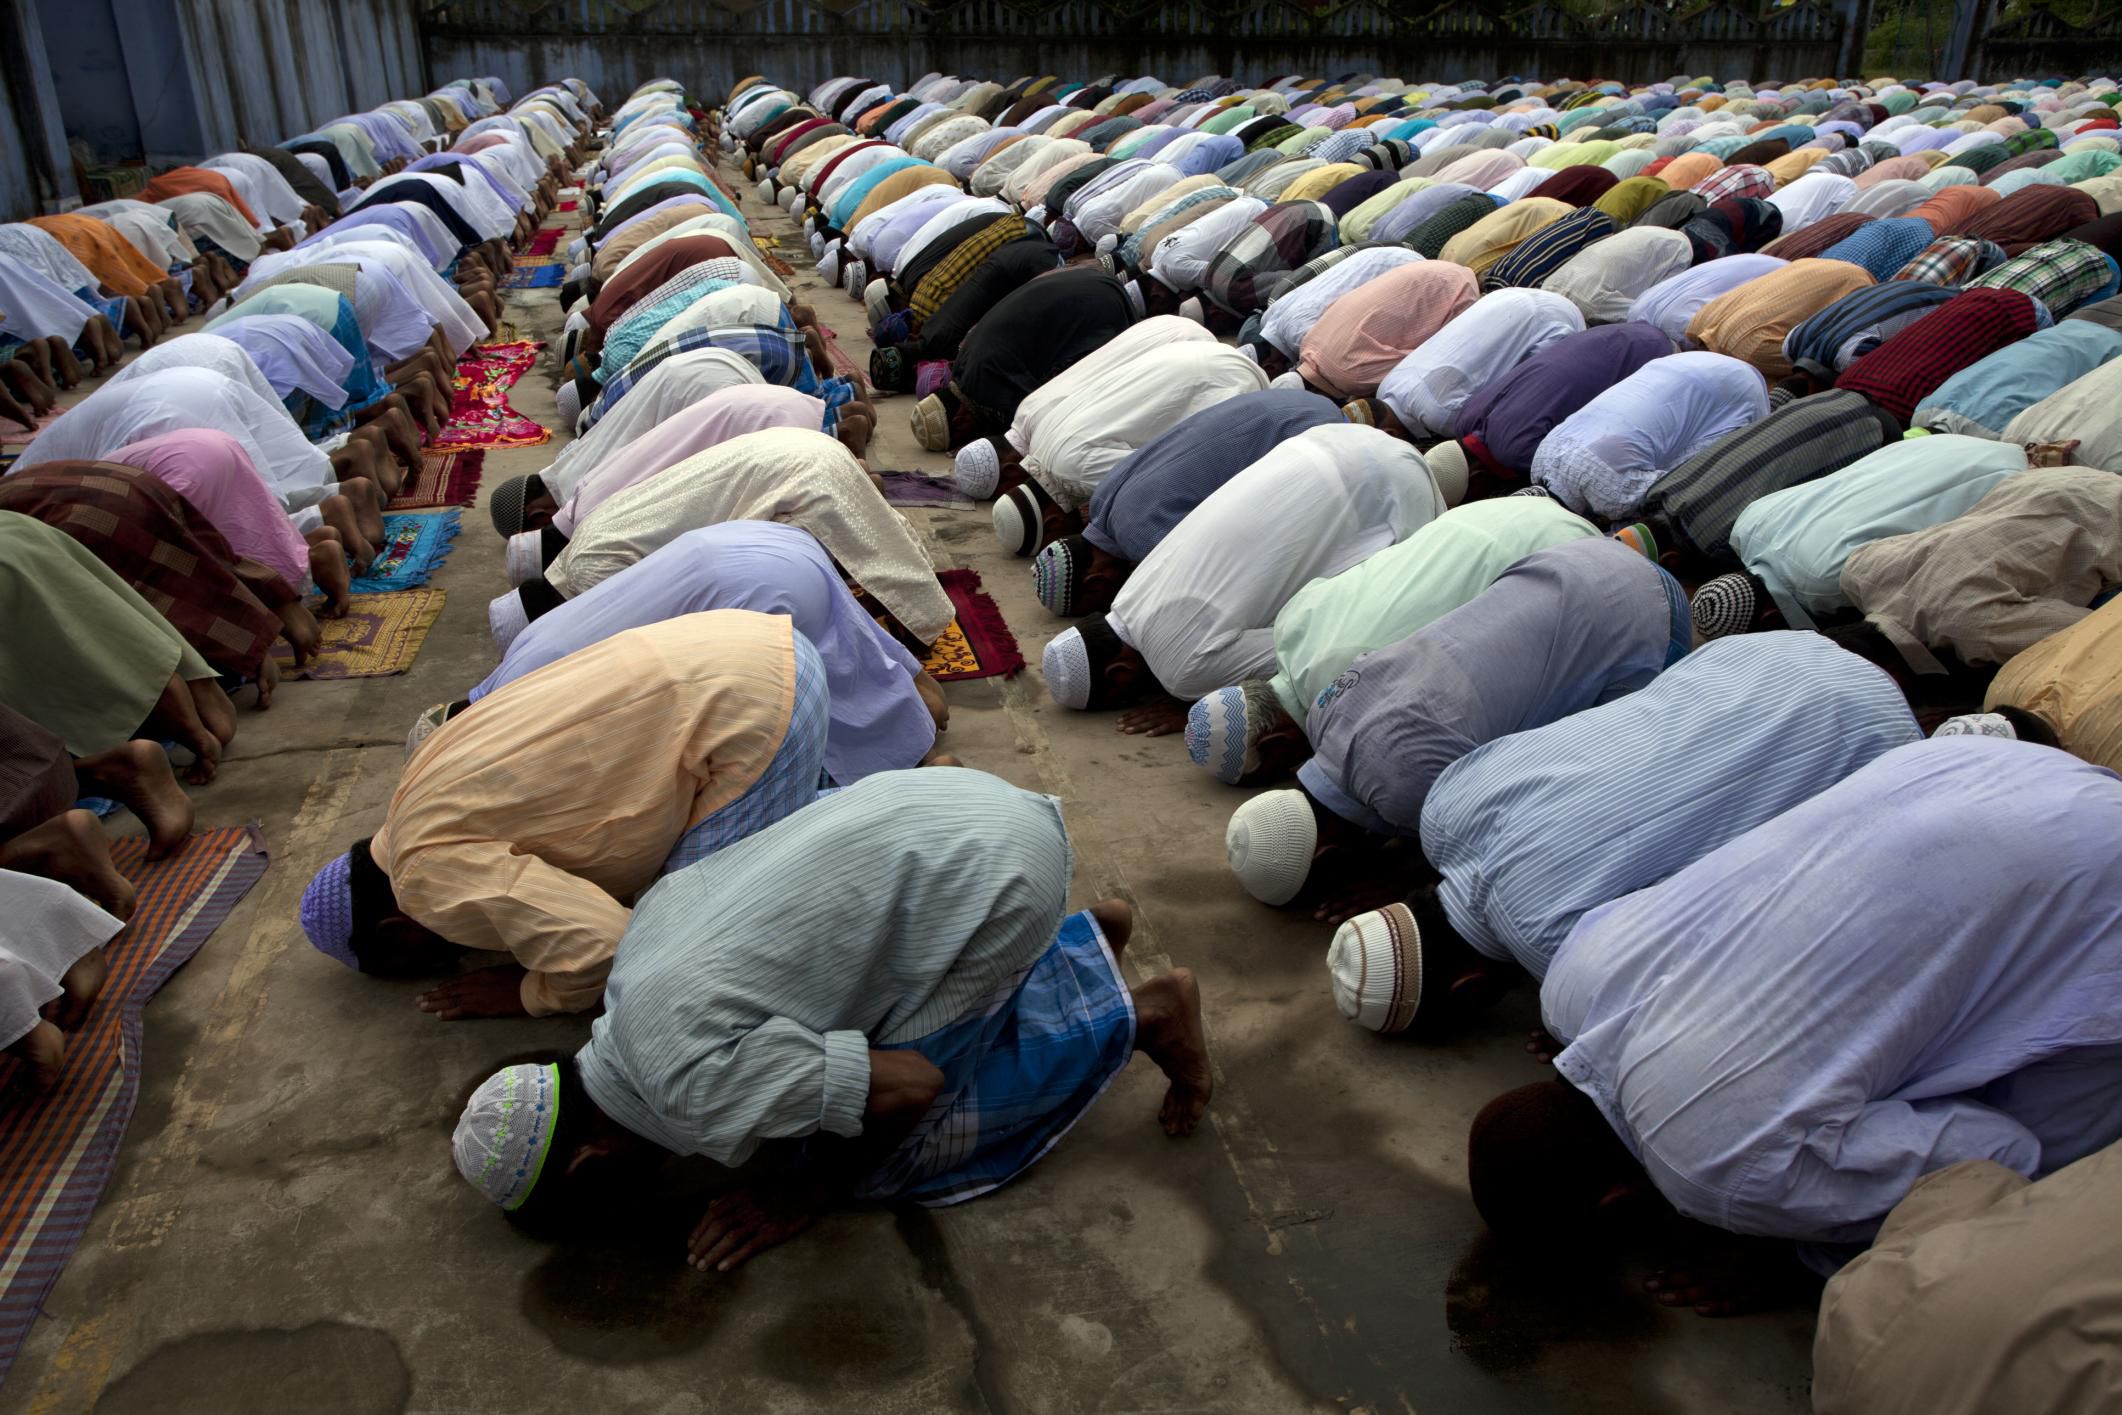 What Do Muslims Do When They Miss Prayers?